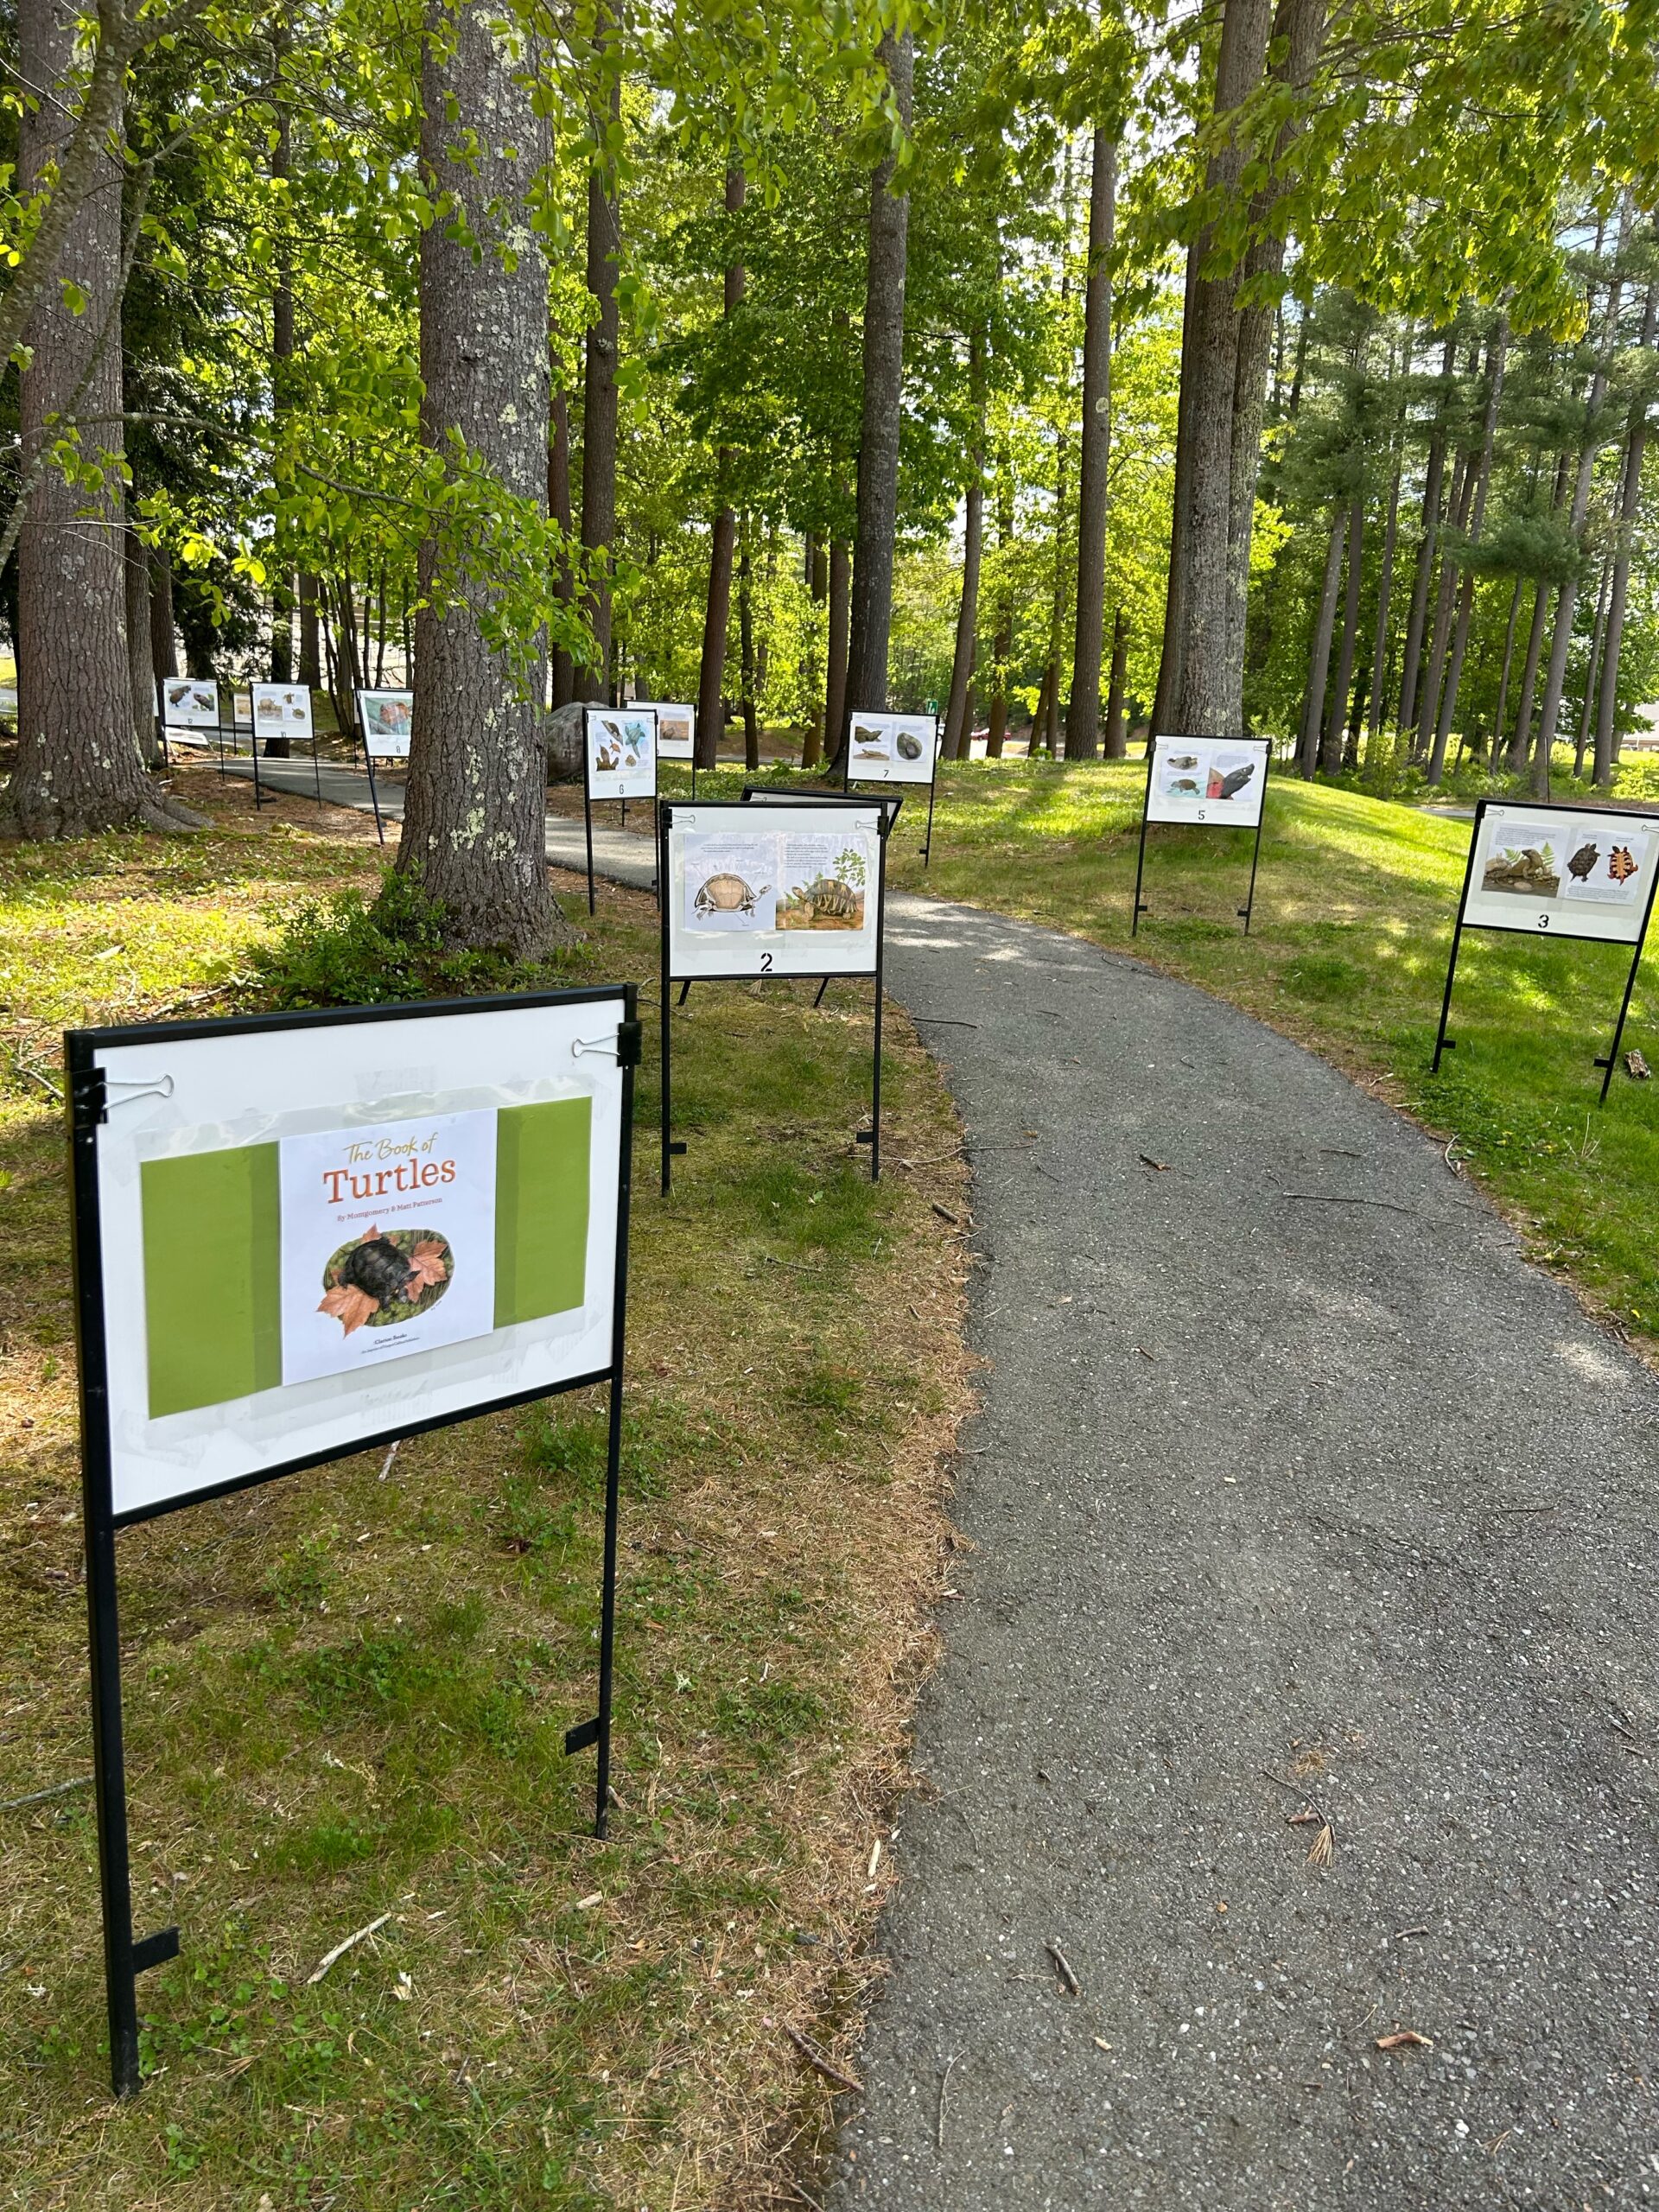 Townsend, MA library celebrates The Book of Turtles with a storywalk